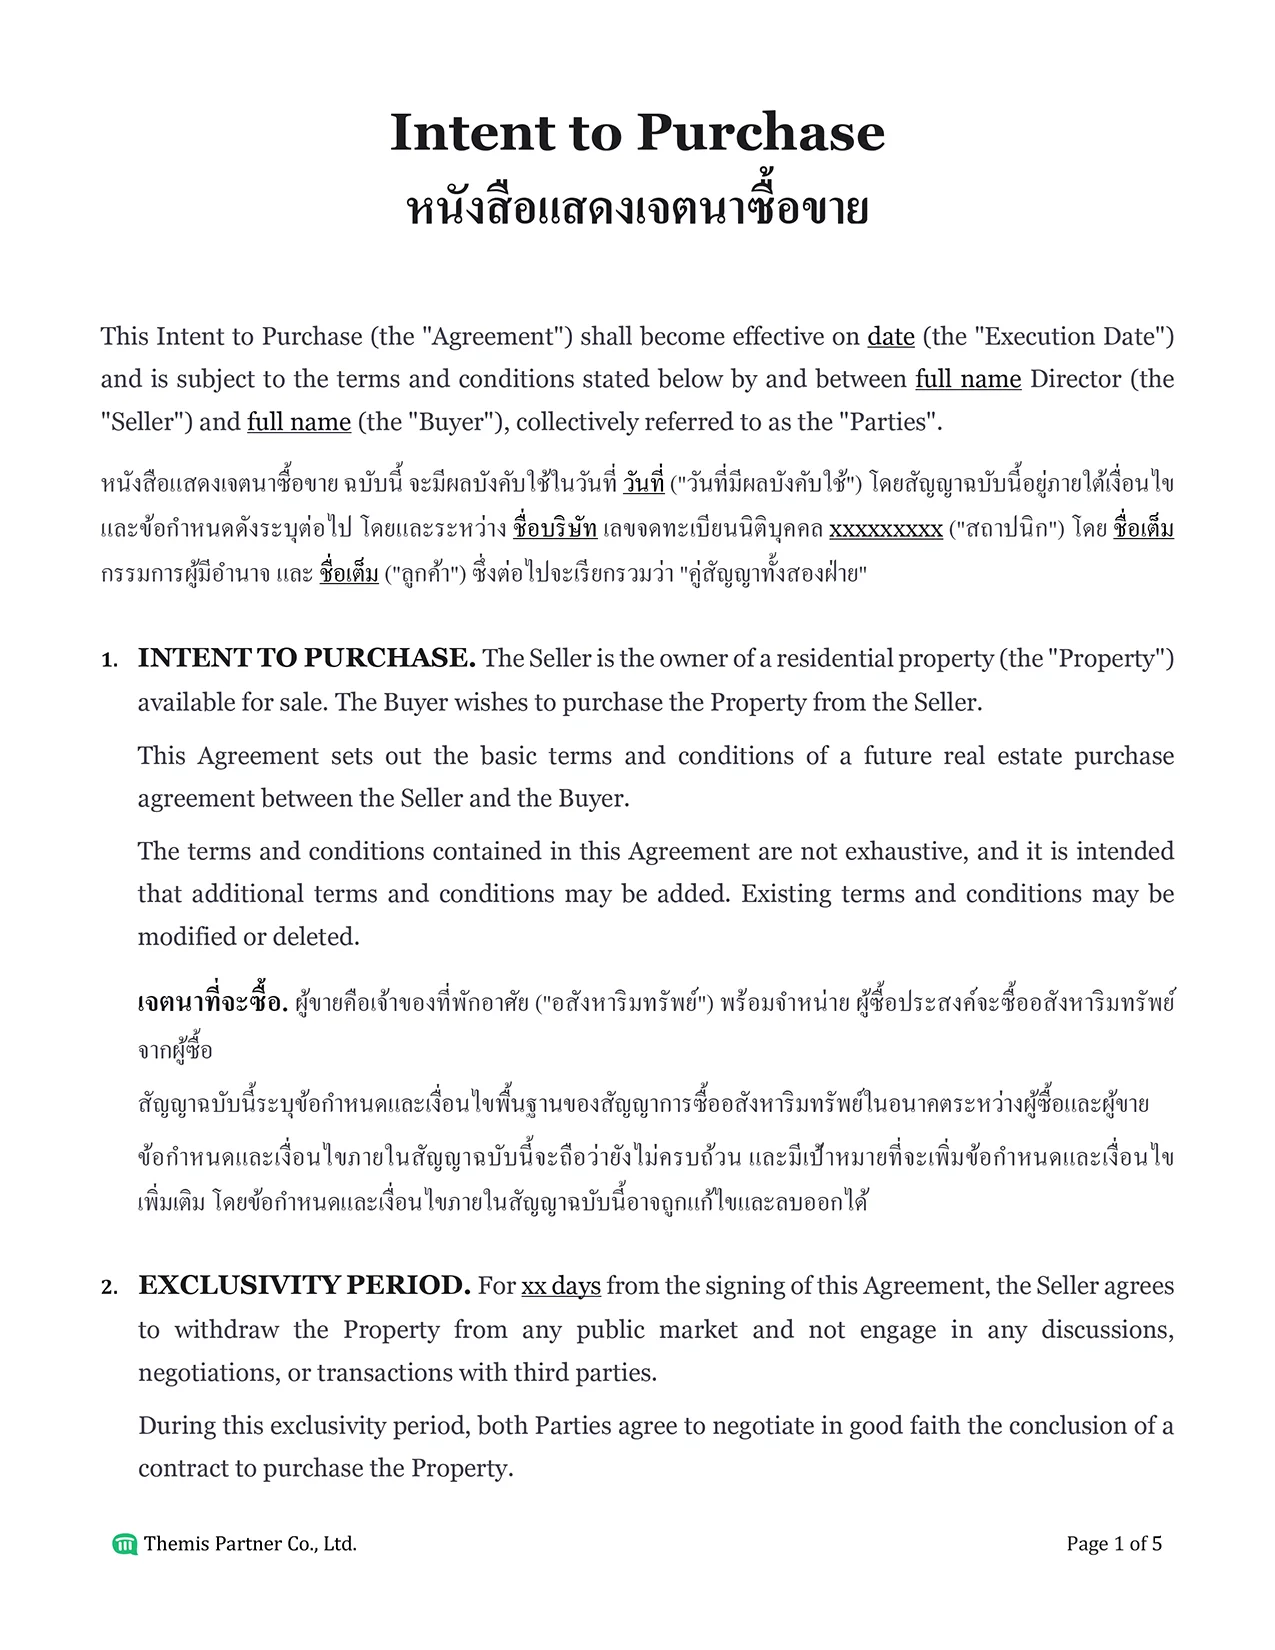 Intent to purchase letter Thailand 1